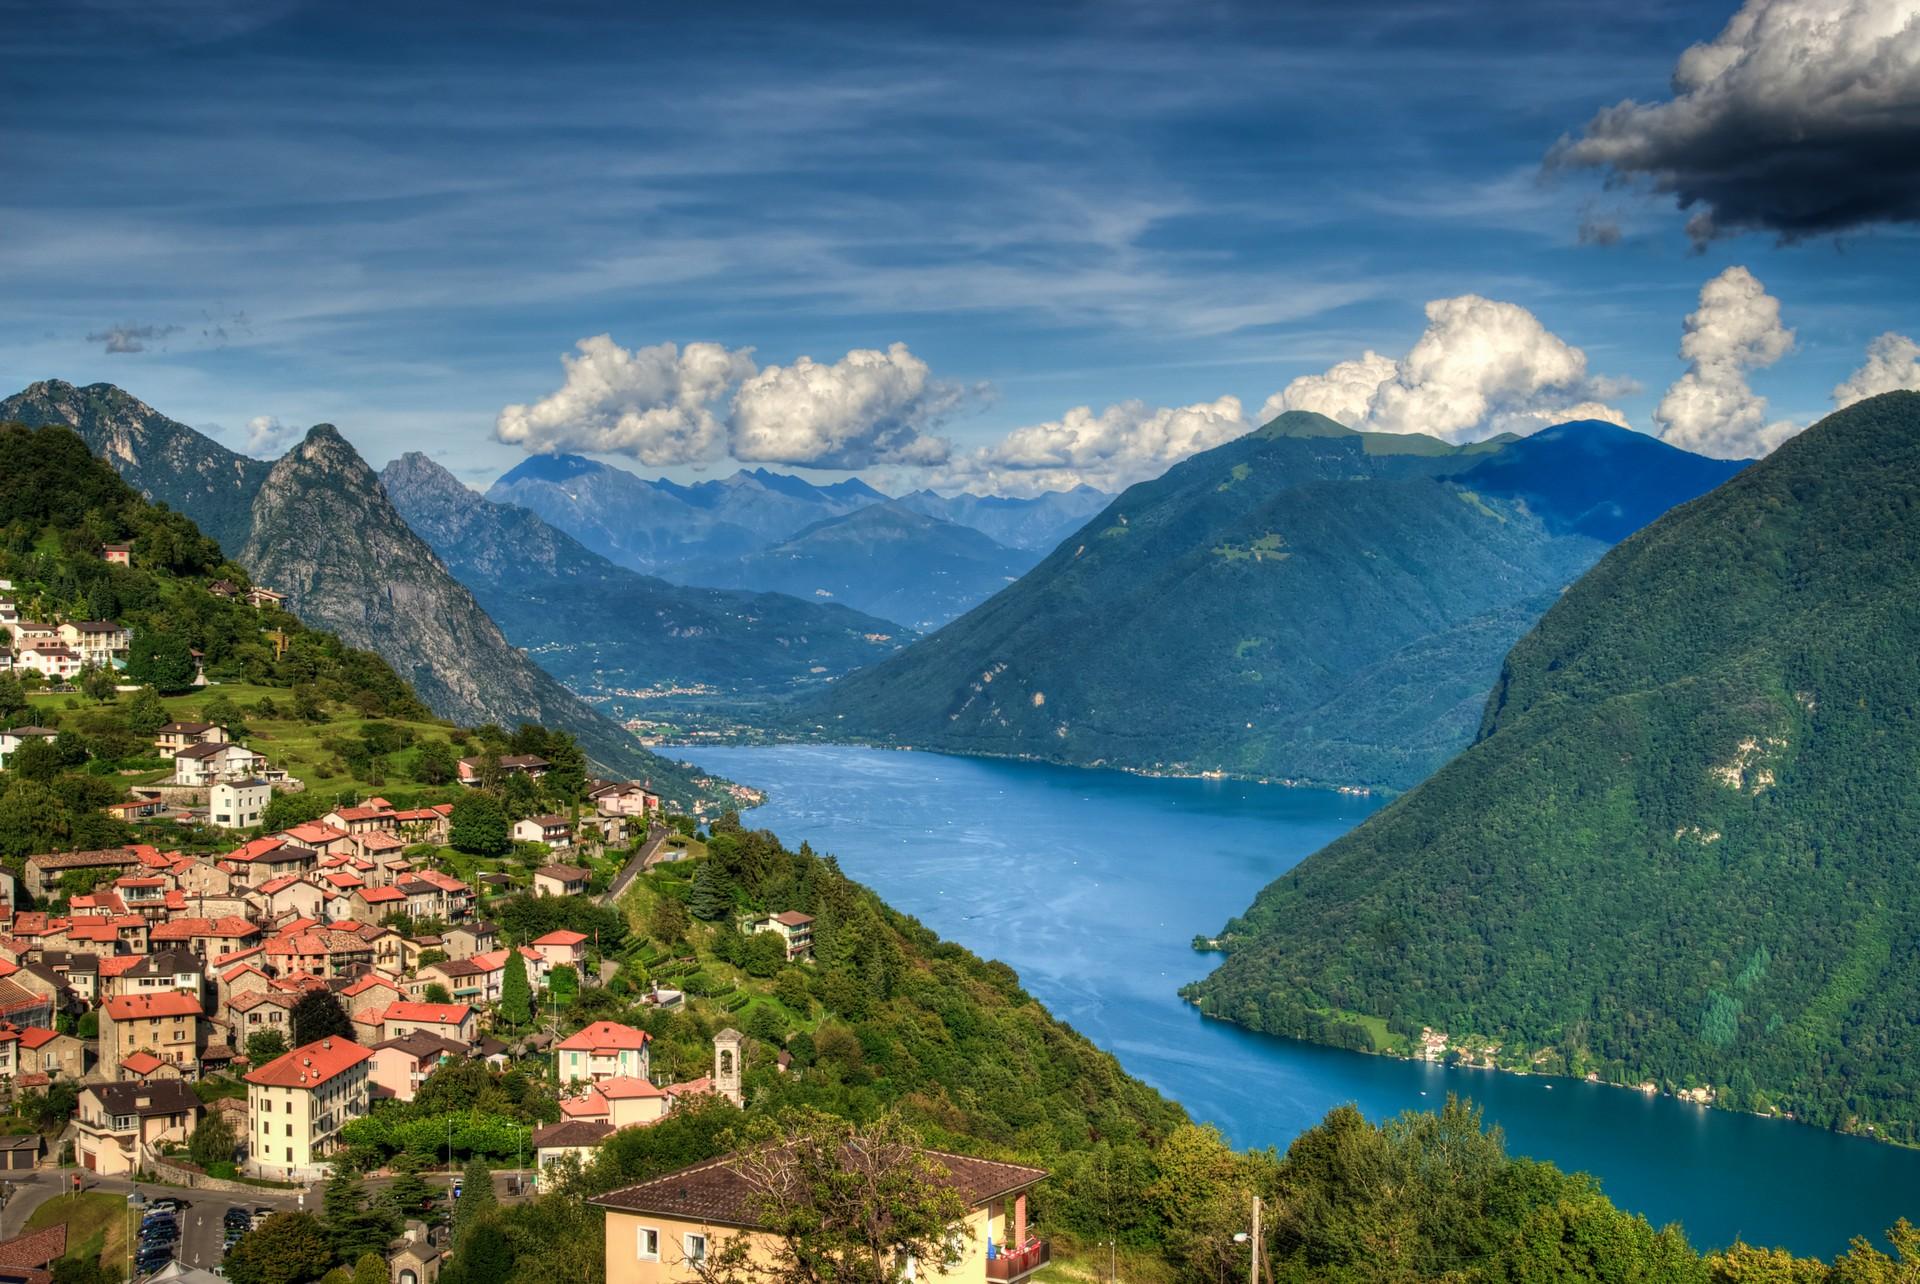 Aerial view of mountain range near Lugano in sunny weather with few clouds